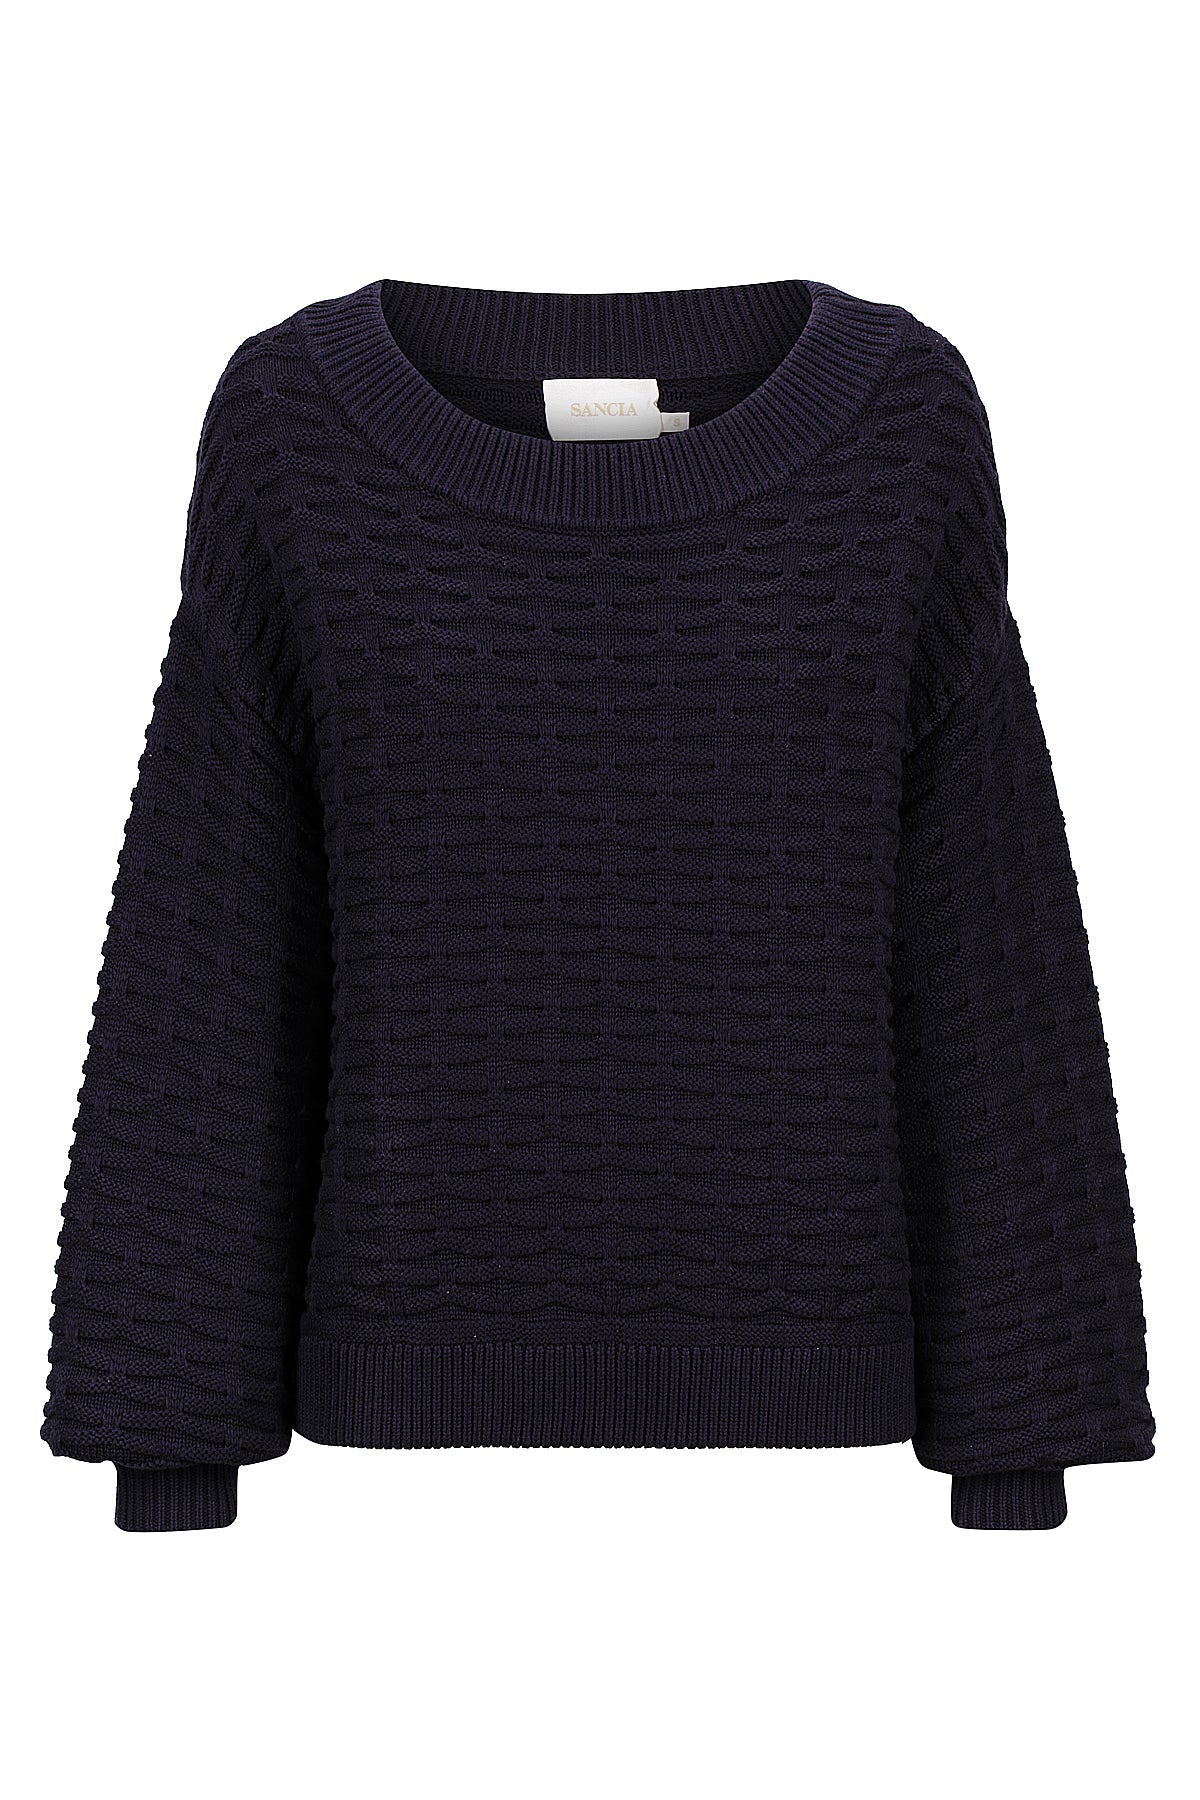 Basket weave navy jumper with scoop neck and long delicately ballooned sleeves with ribbed cuff collar and hem